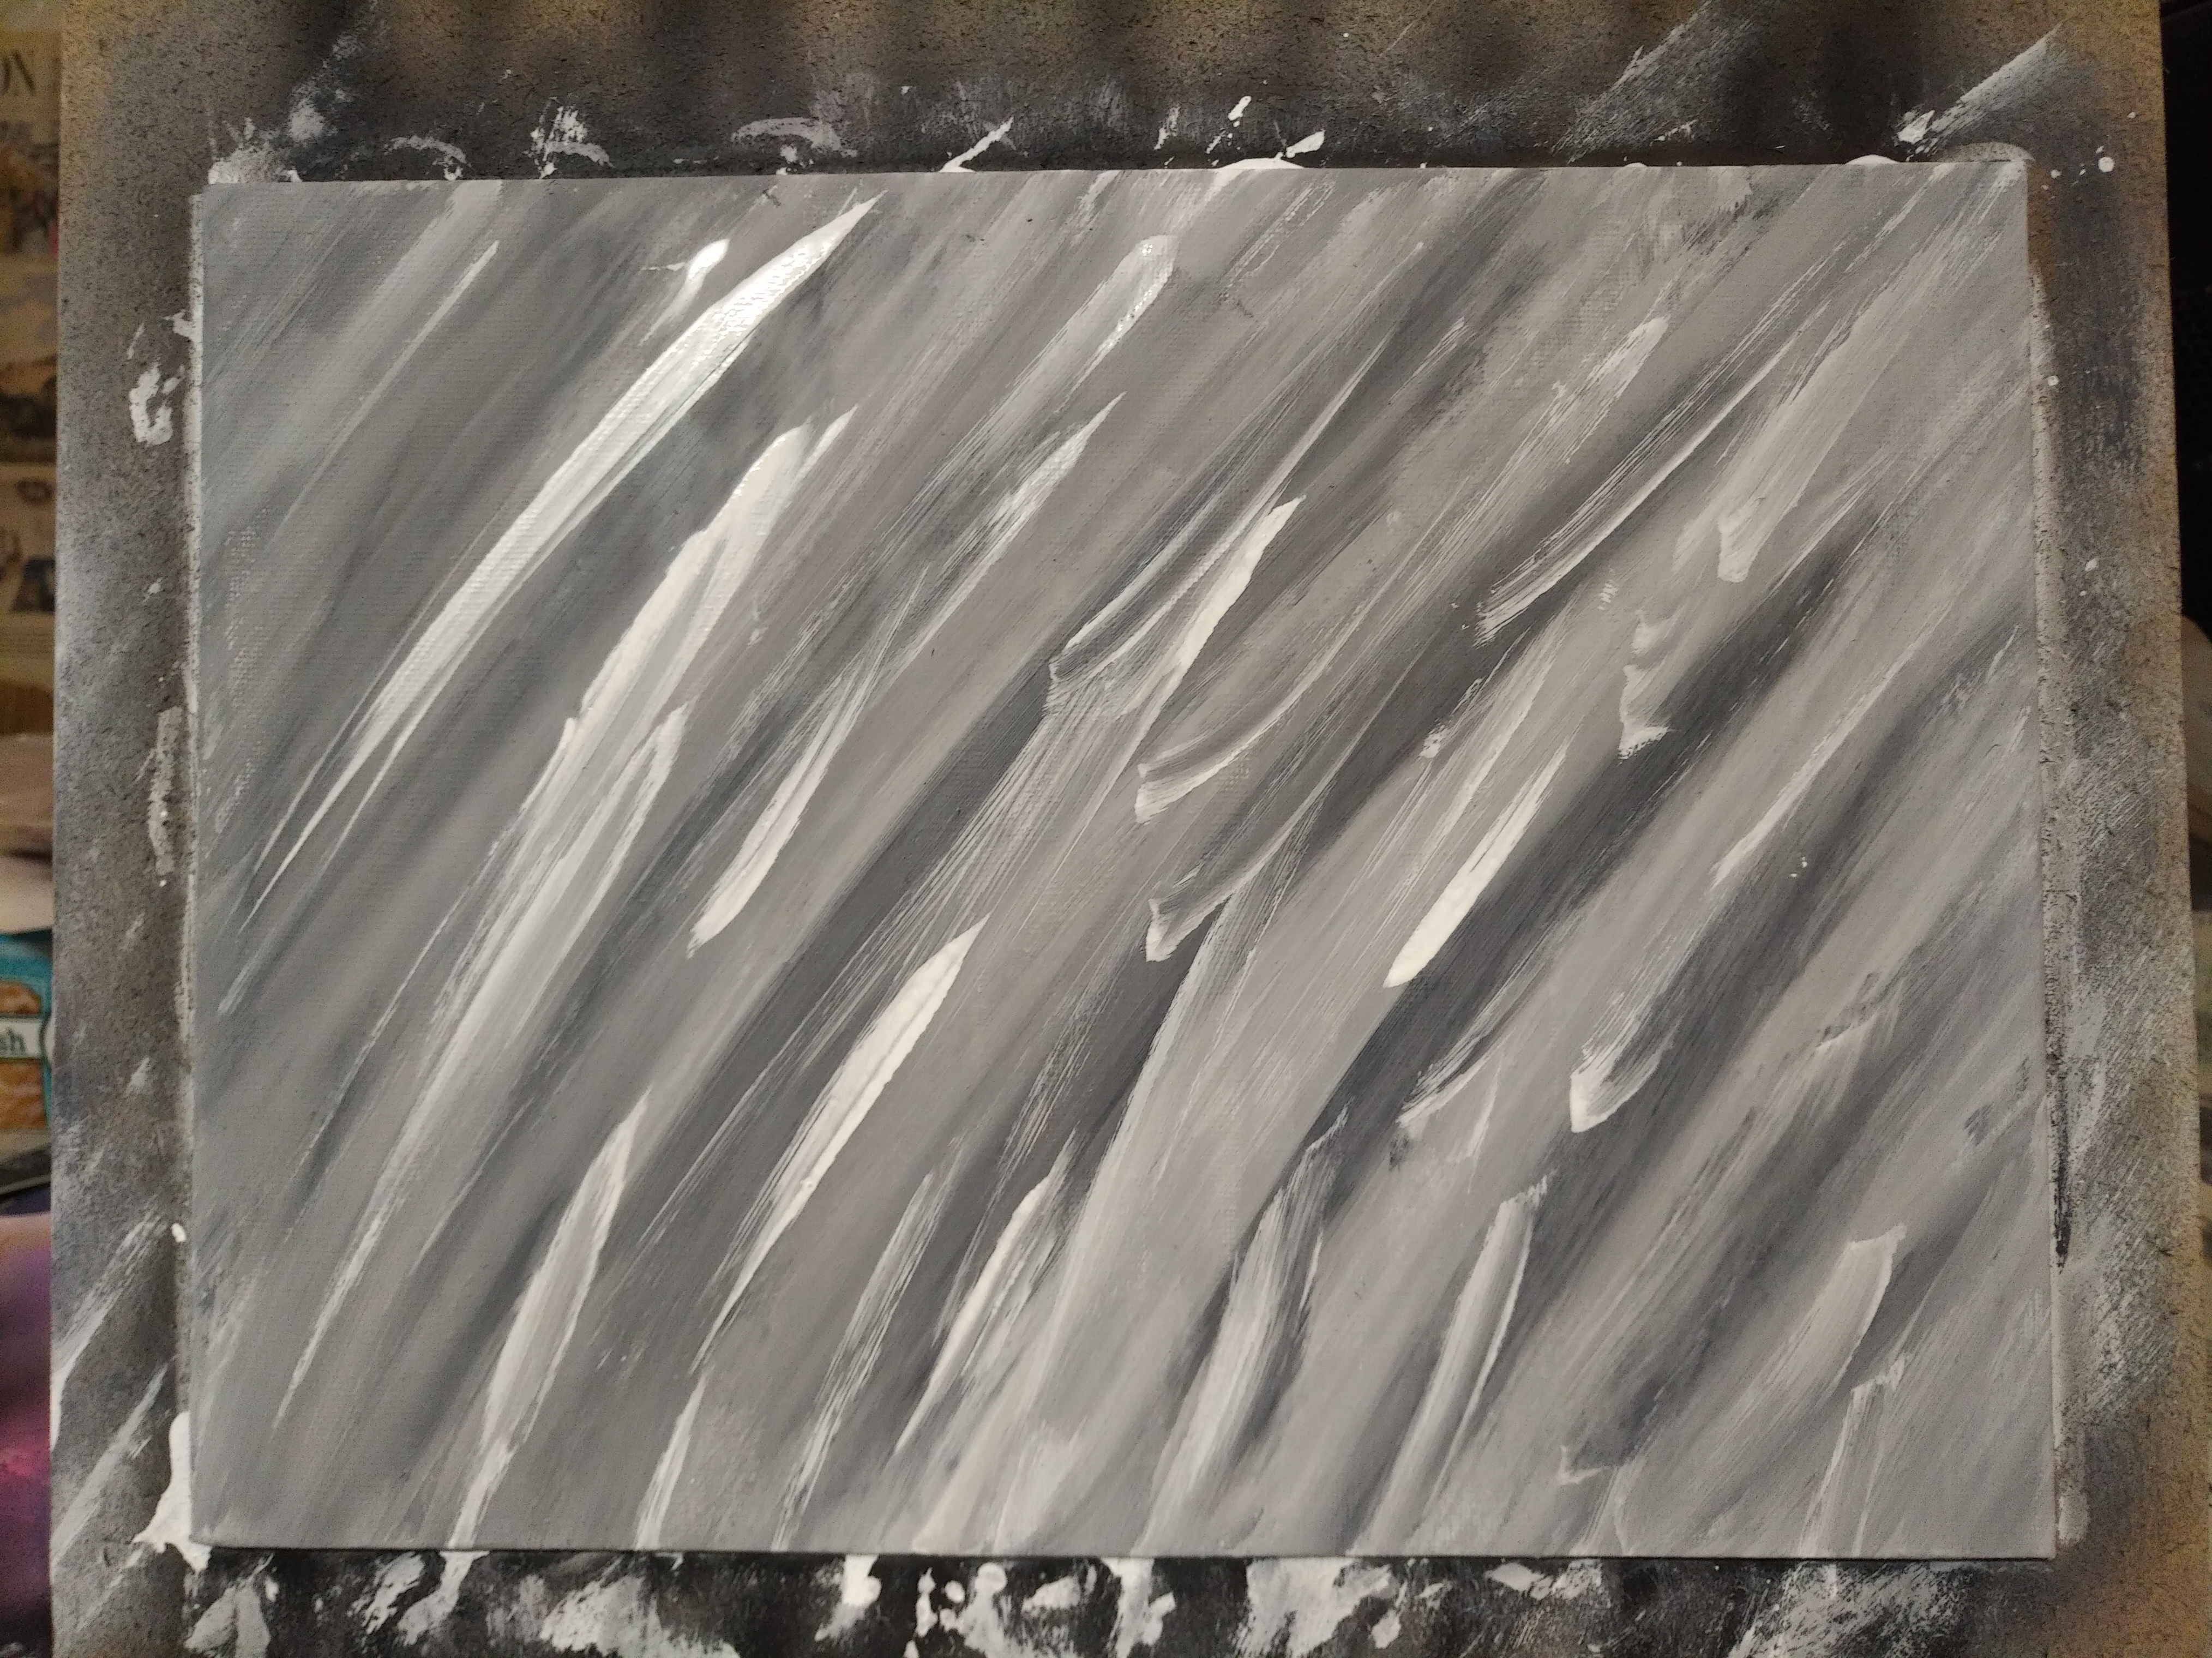 a black and white painting. it might be a snowstorm or it might be a piece of plastic. you decide